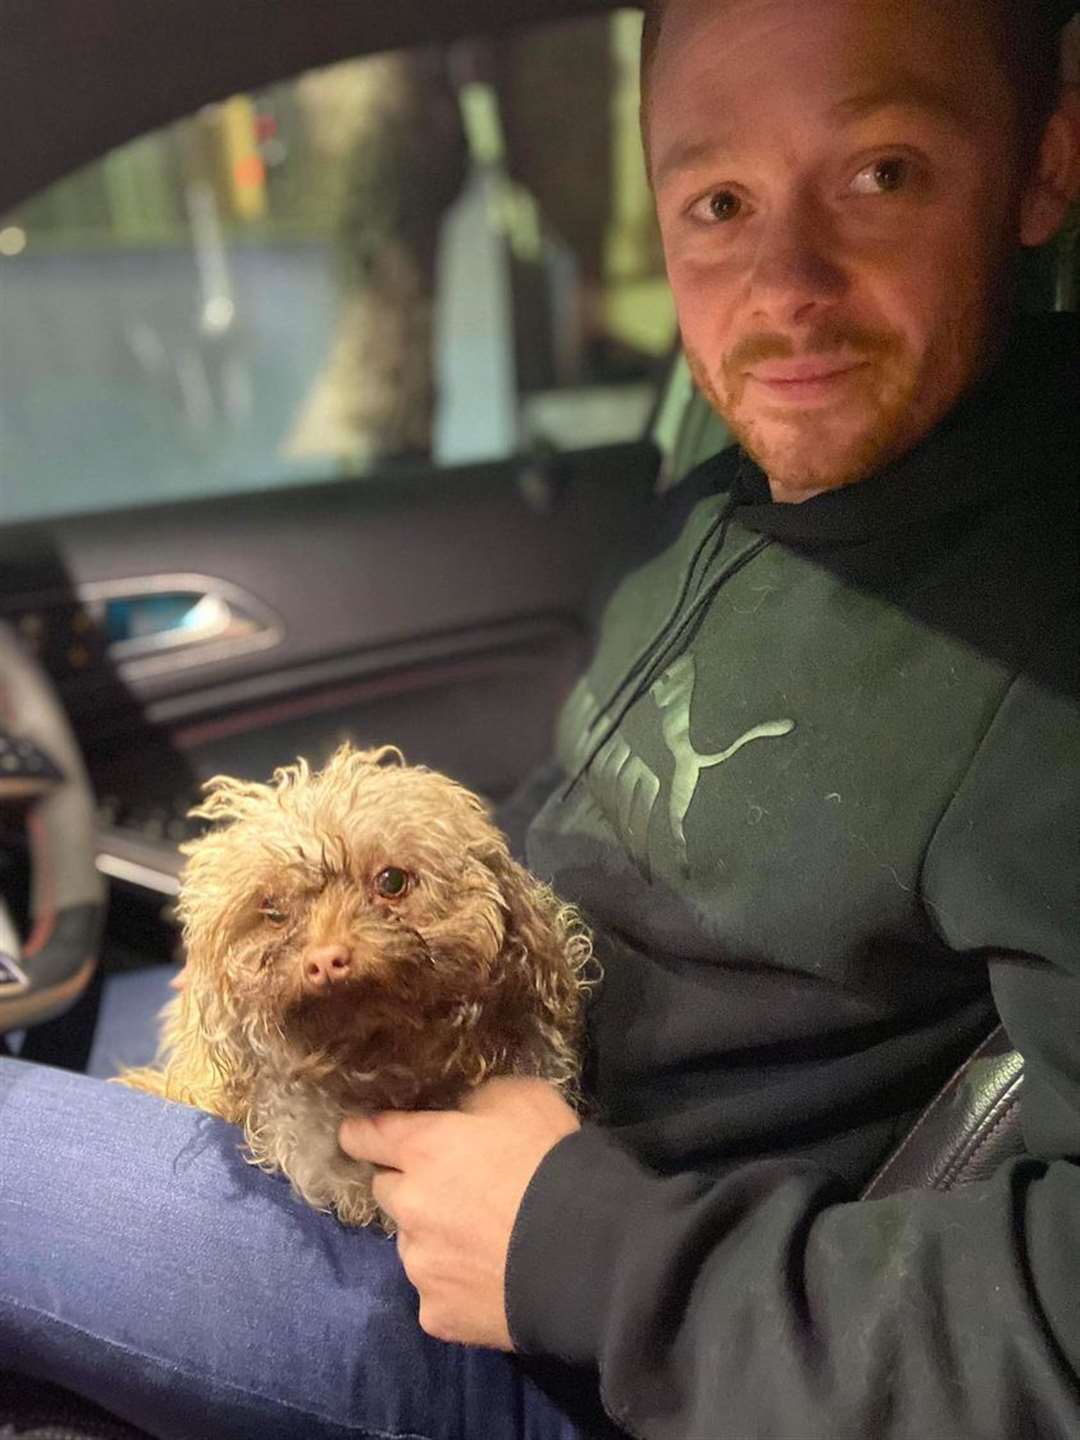 The couple collected the dog on Monday night to bring him home